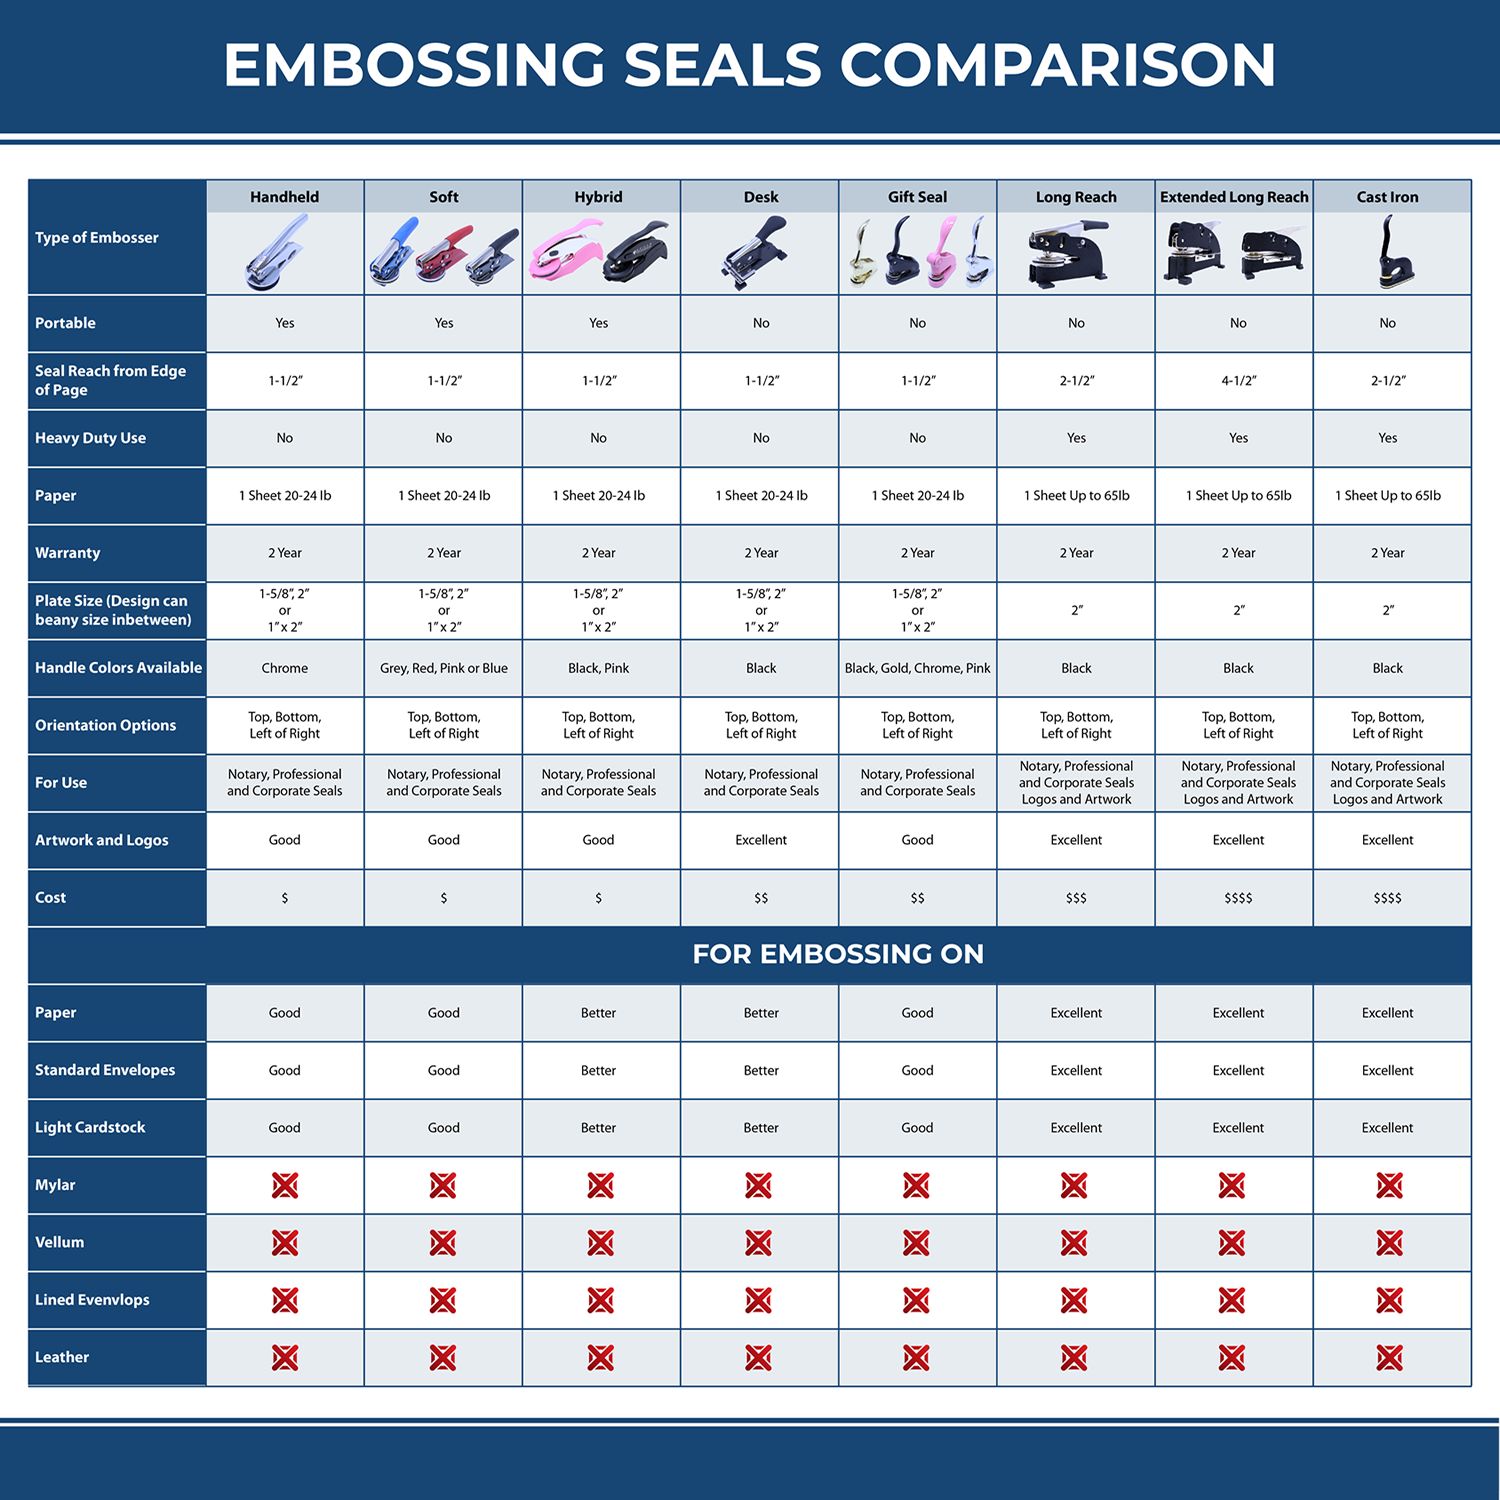 A comparison chart for the different types of mount models available for the North Dakota Desk Surveyor Seal Embosser.